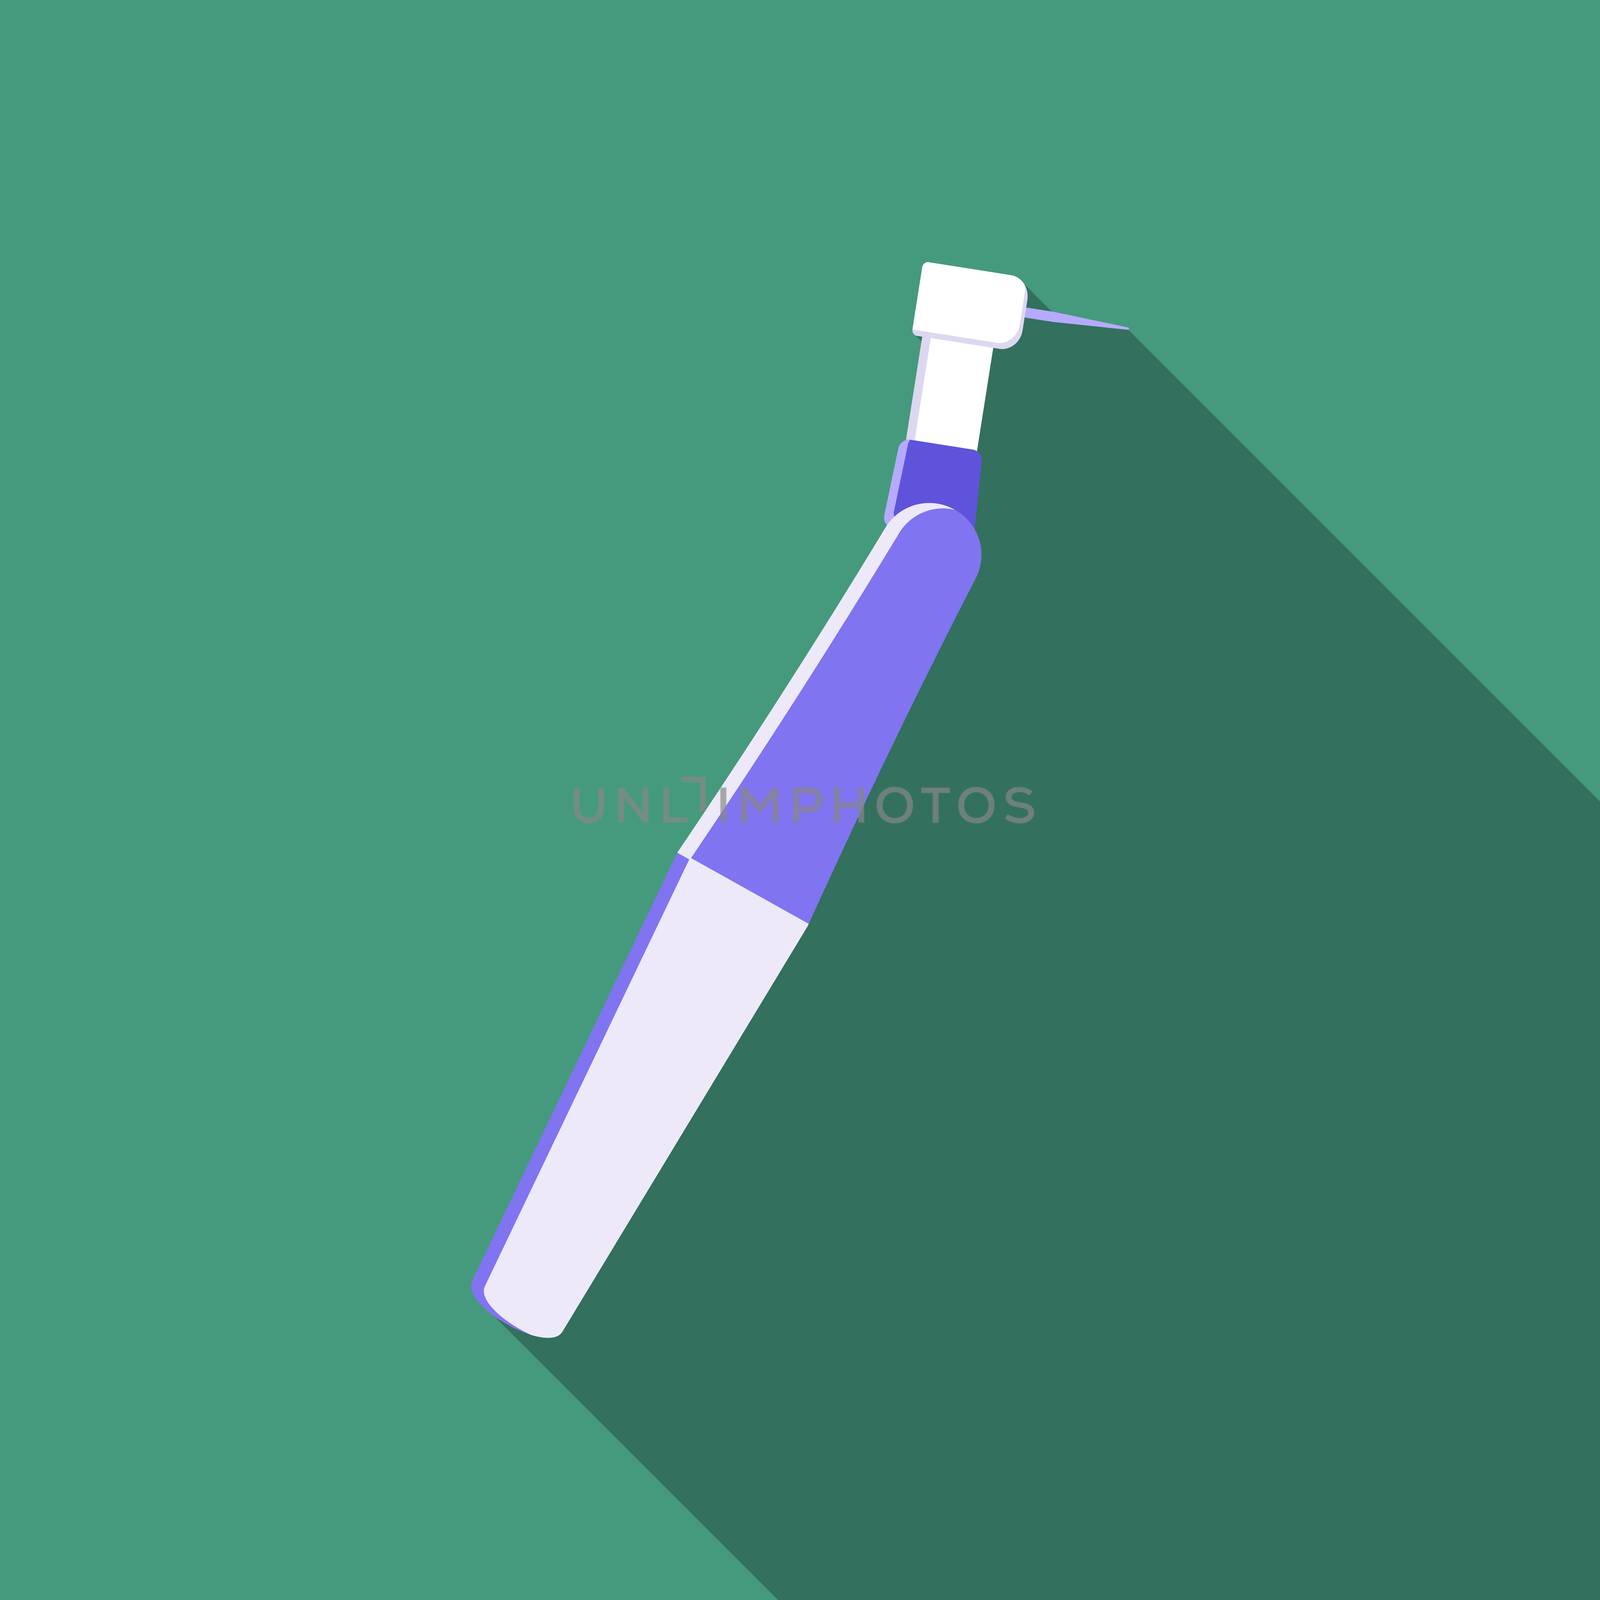 Flat design modern vector illustration of medical dental drill icon with long shadow.